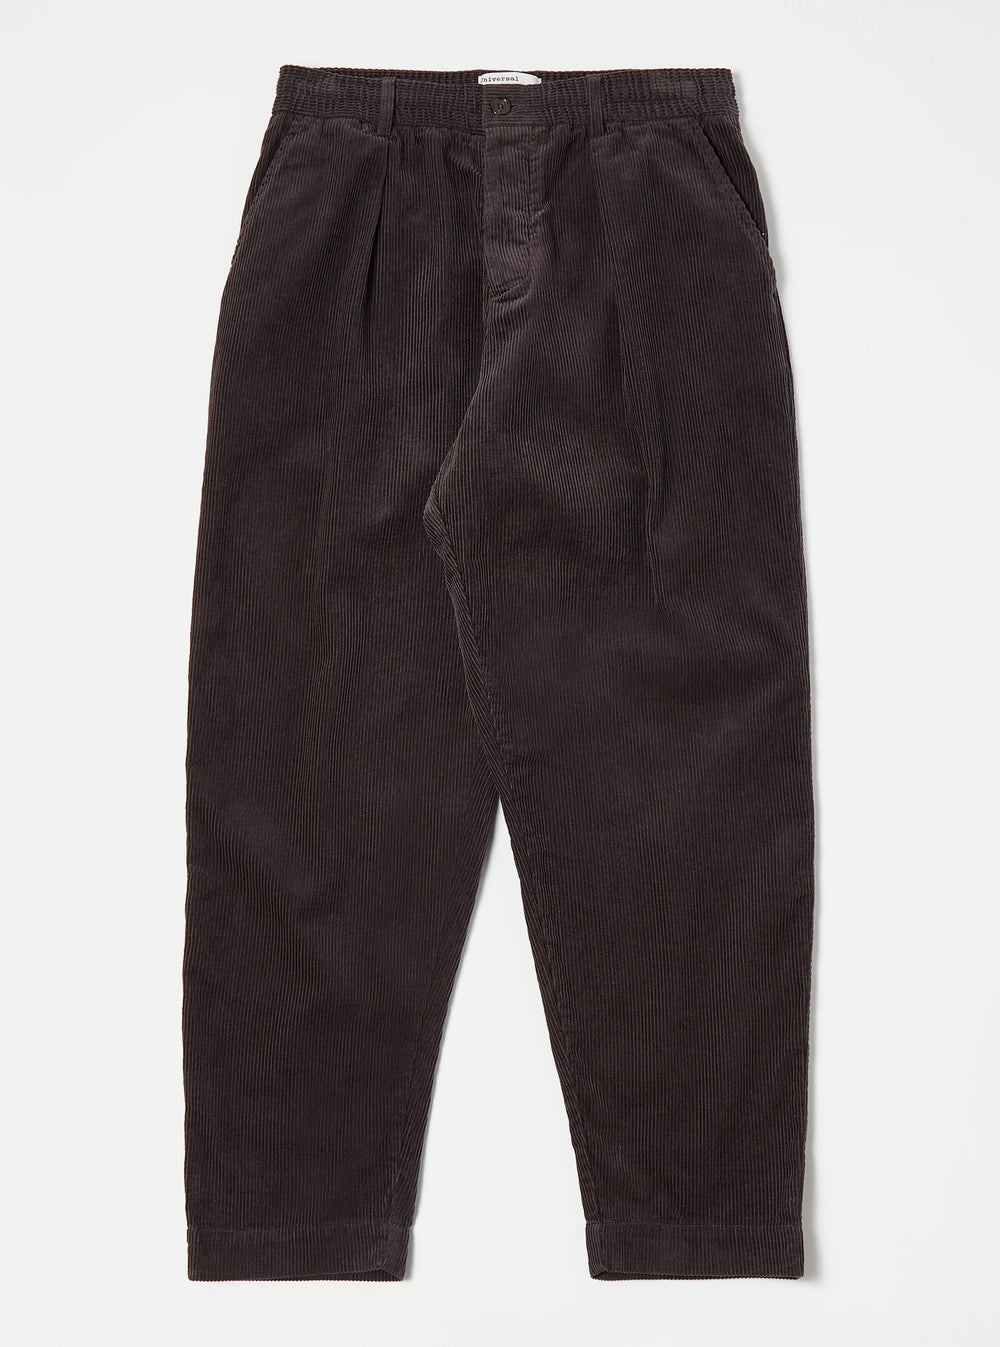 Pleated Track Pant - Cord Licorice